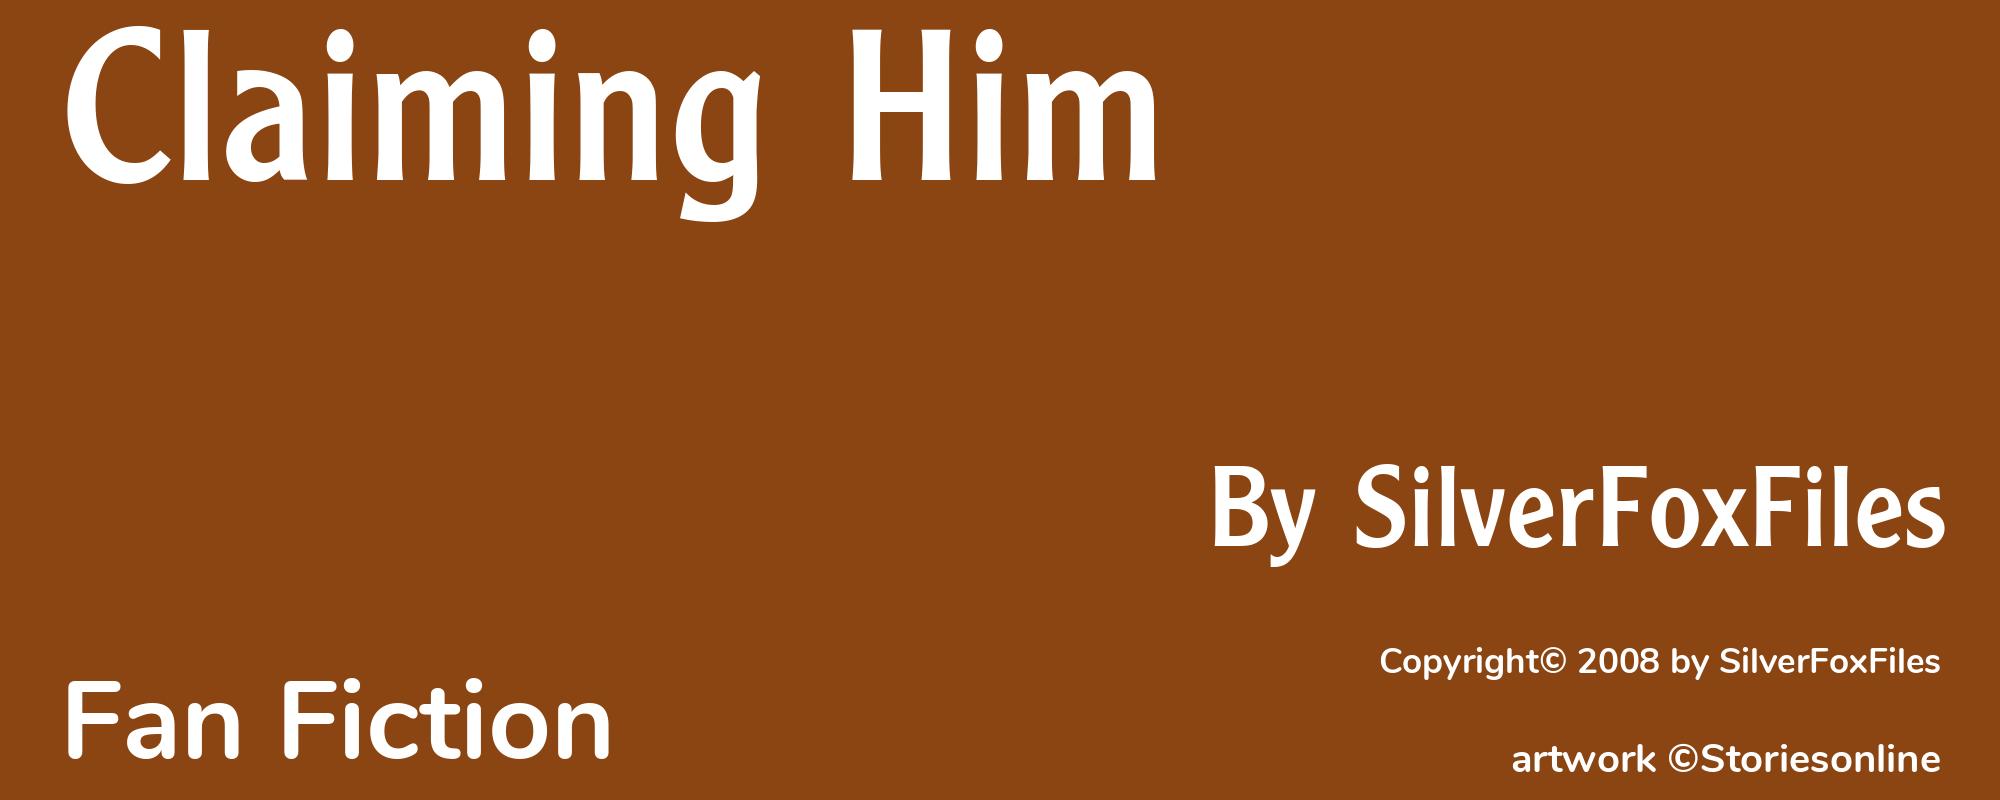 Claiming Him - Cover